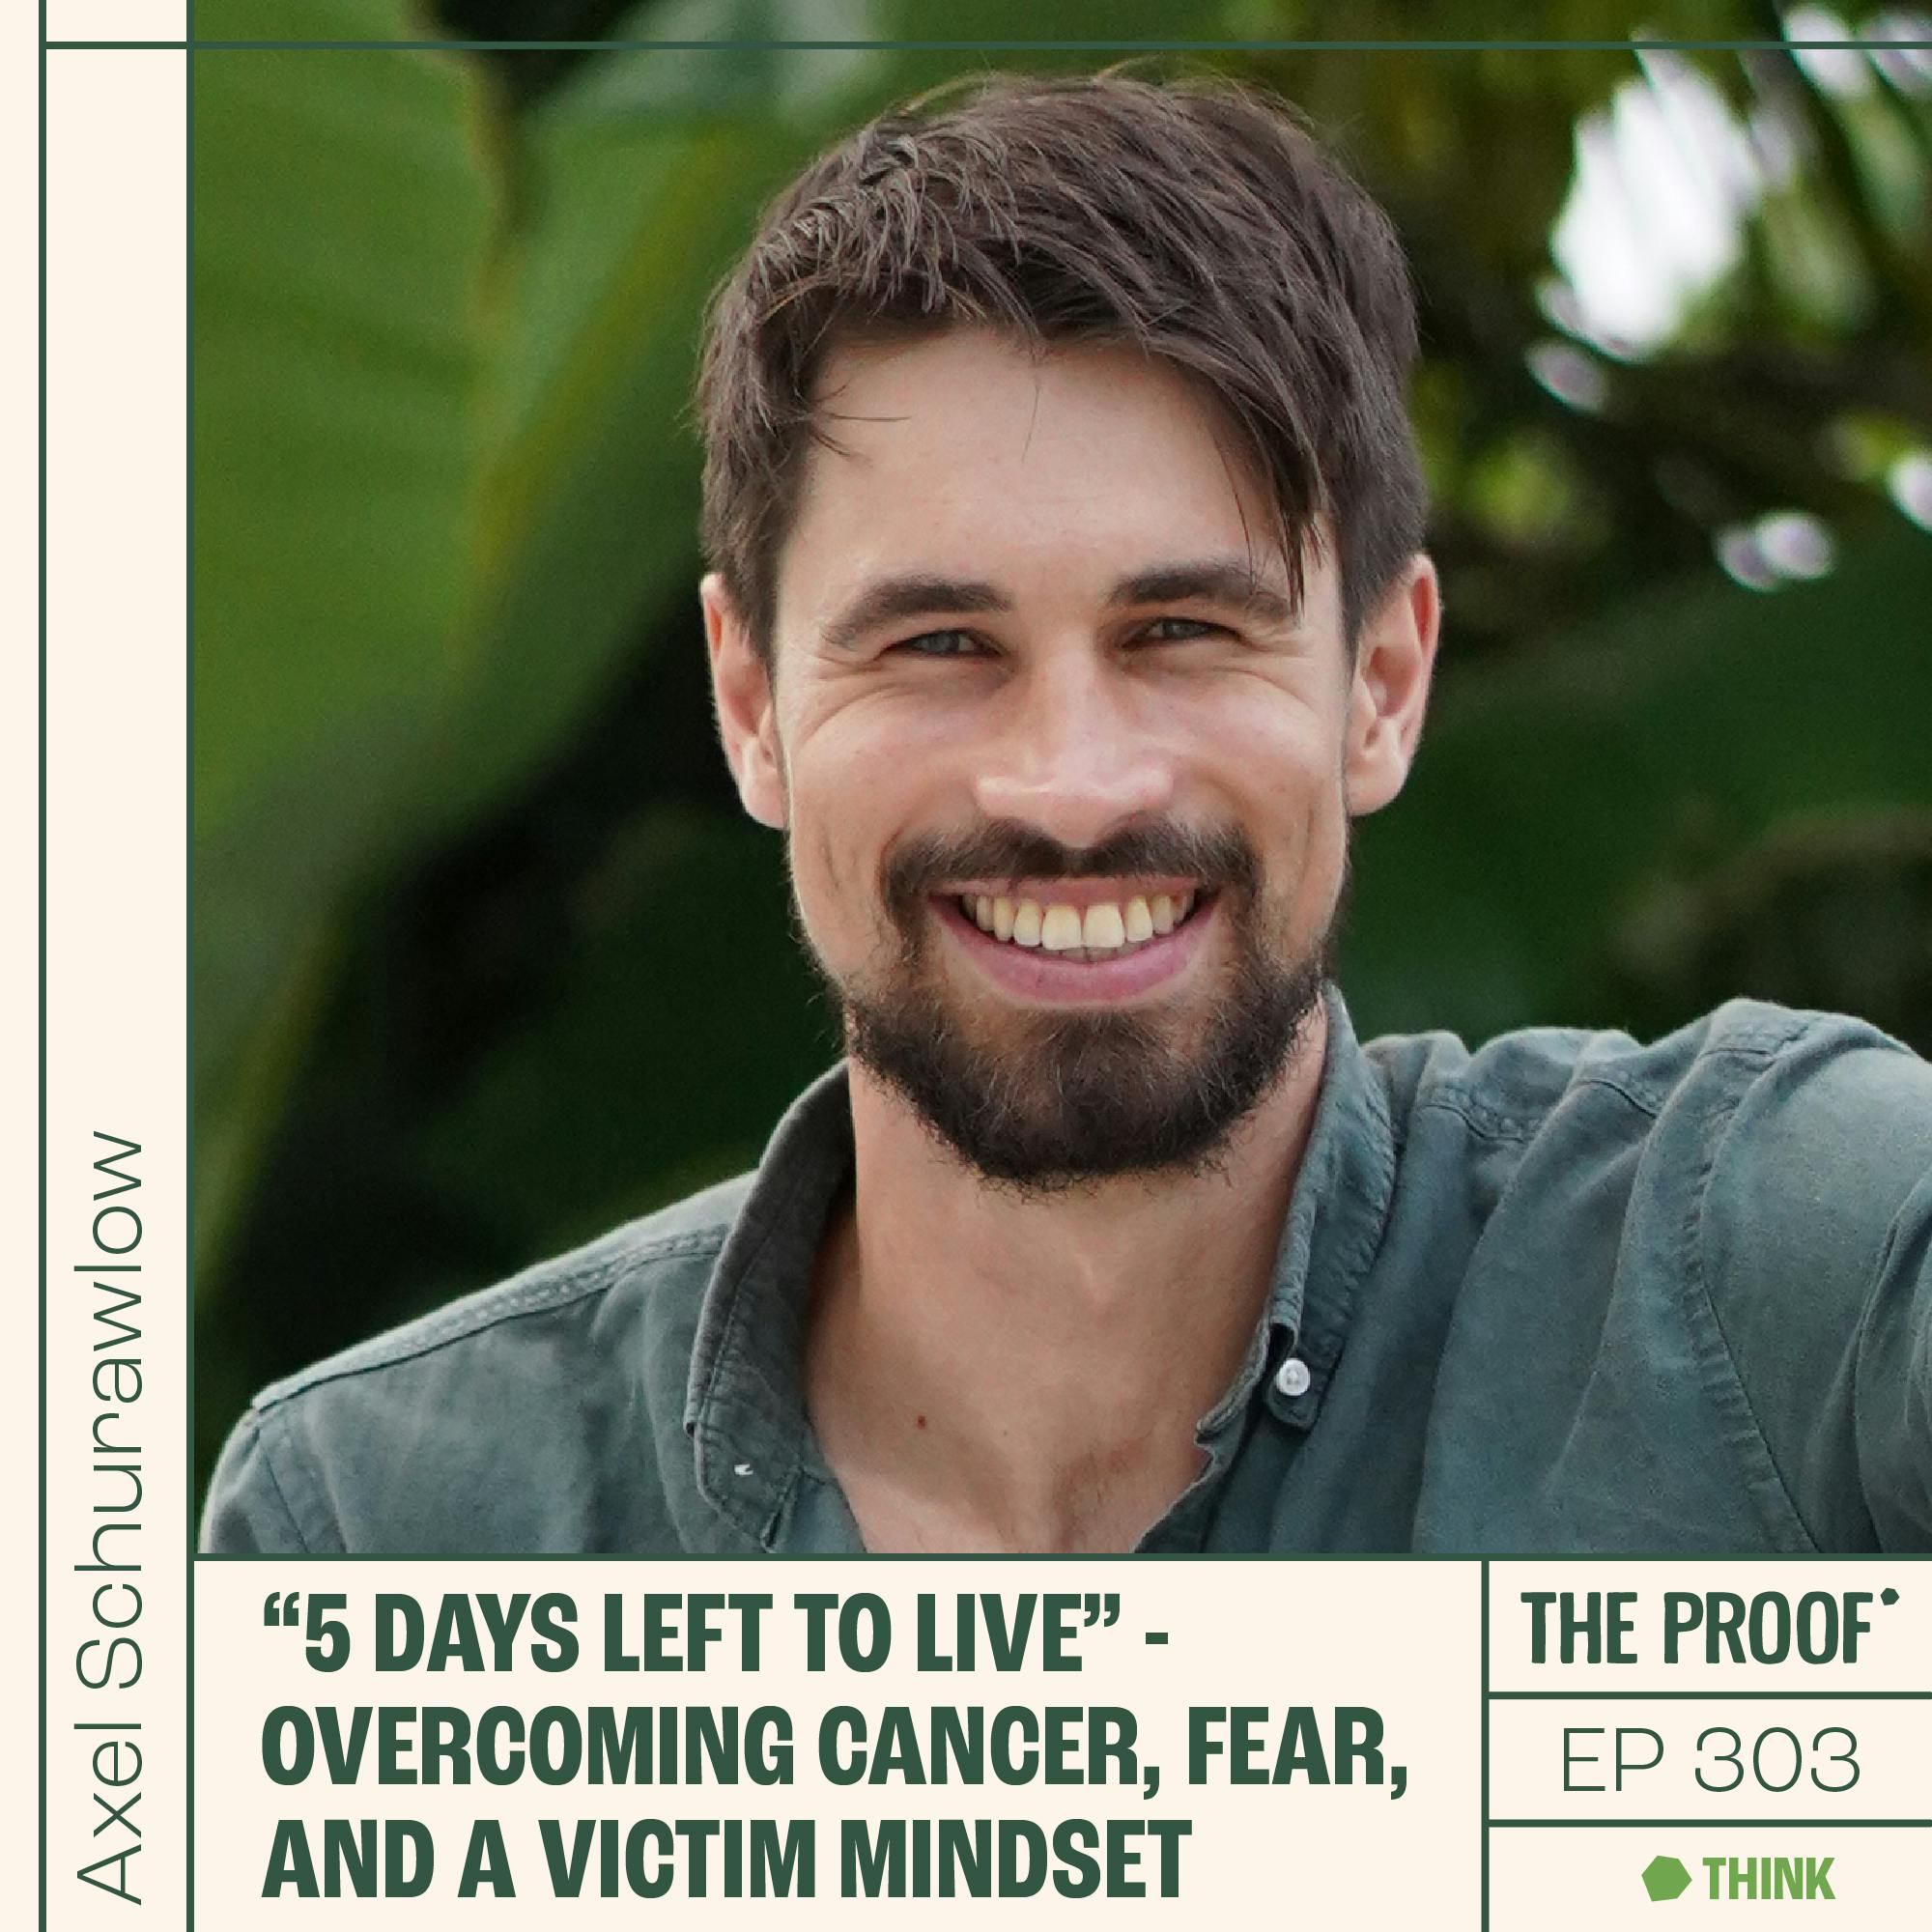 “5 days left to live” - Overcoming Cancer, Fear, and a Victim Mindset | Axel Schurawlow